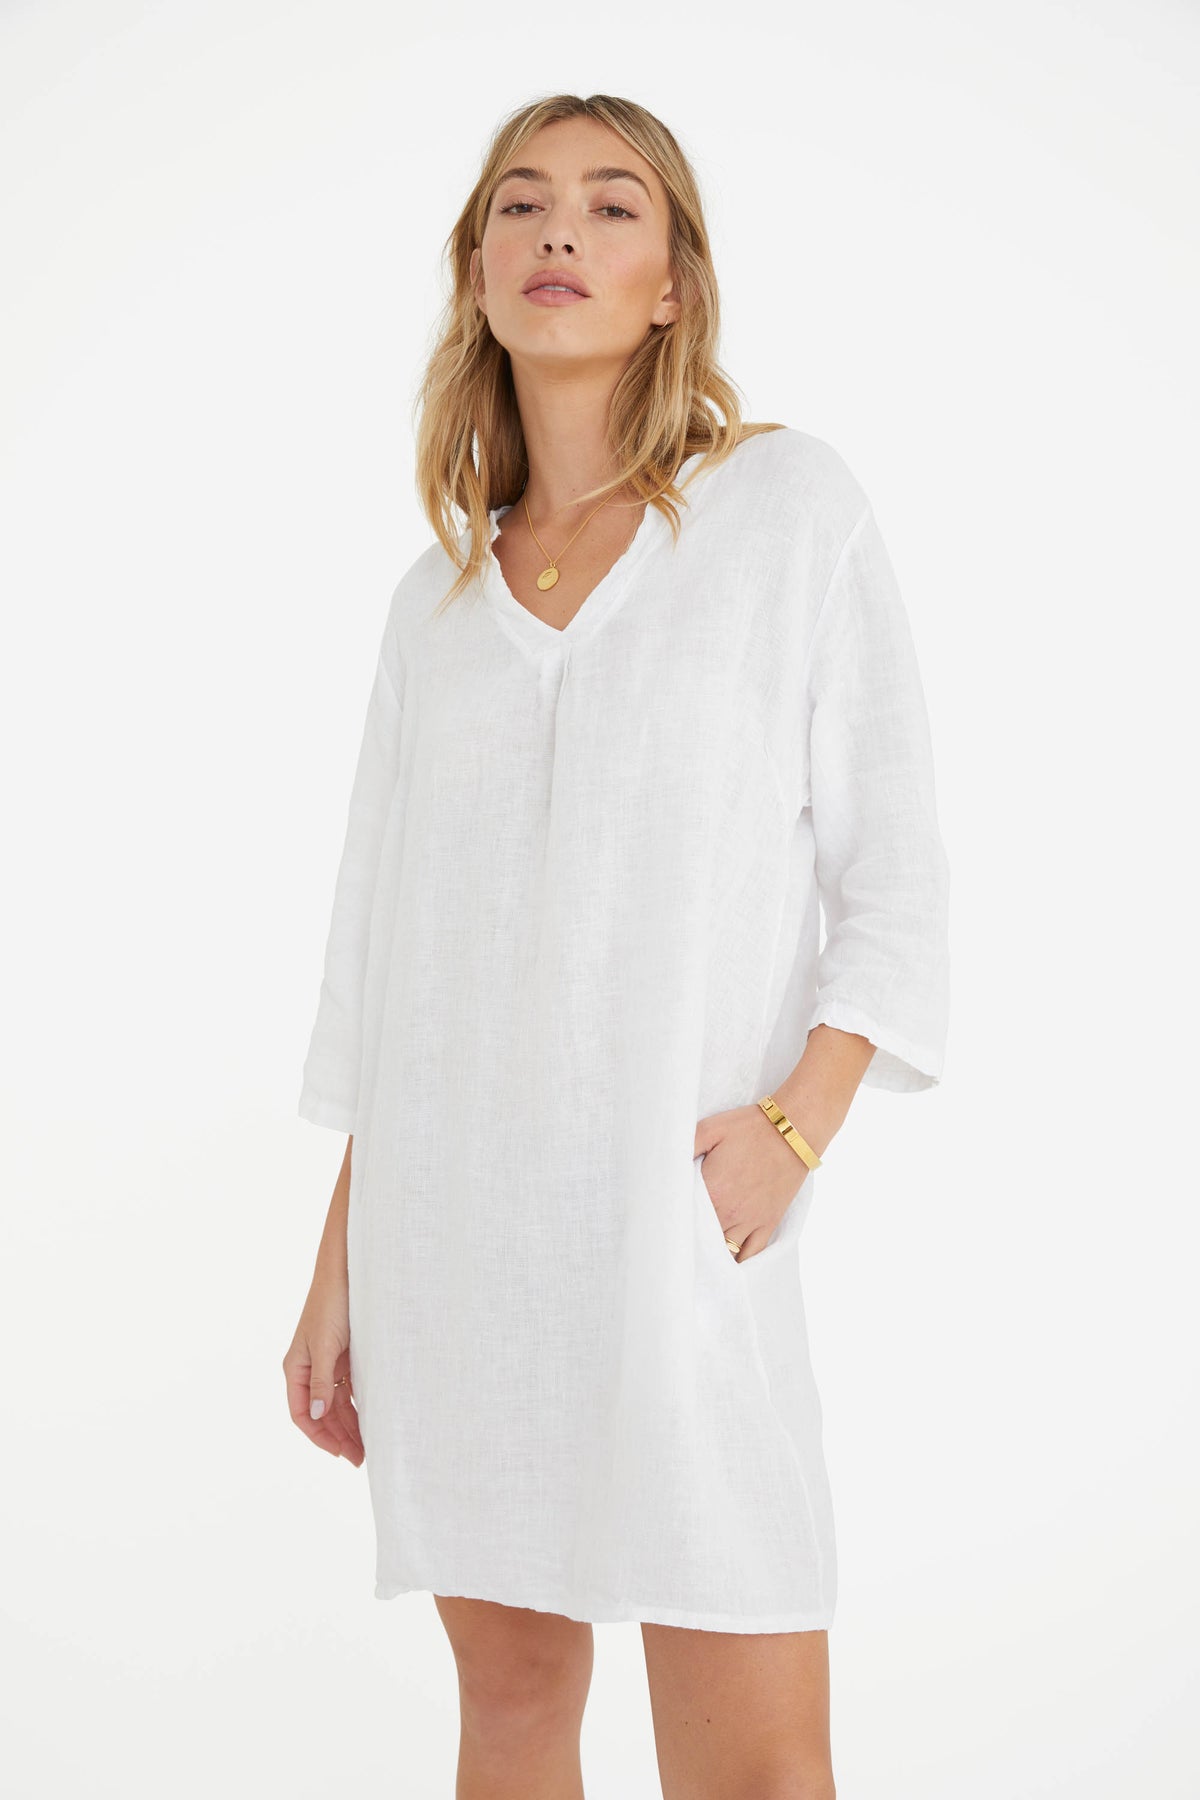 The Katy Linen Dress in White - Marché